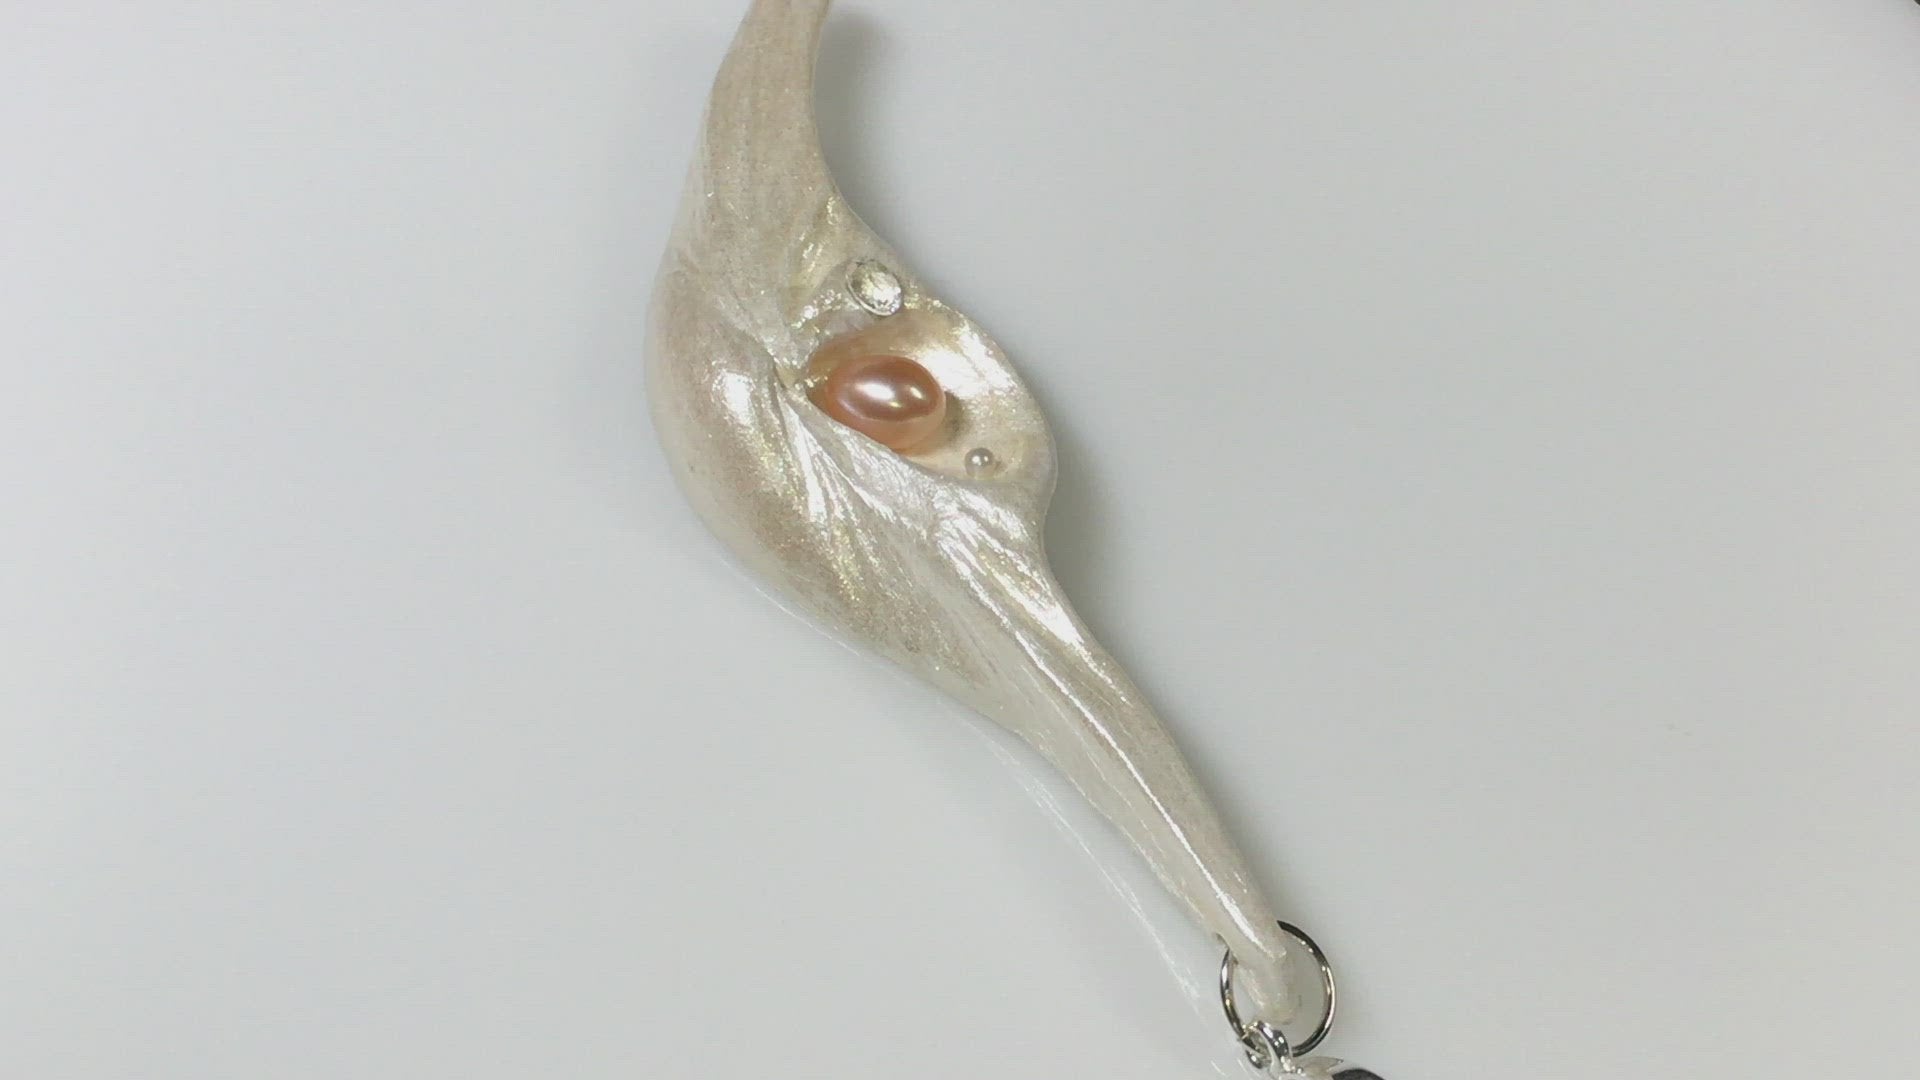 A video showcasing Nefertiti natural seashell and a real 8 mm pink freshwater Pearl, a baby pearl and a 5mm faceted Herkimer diamond compliments the pendant.